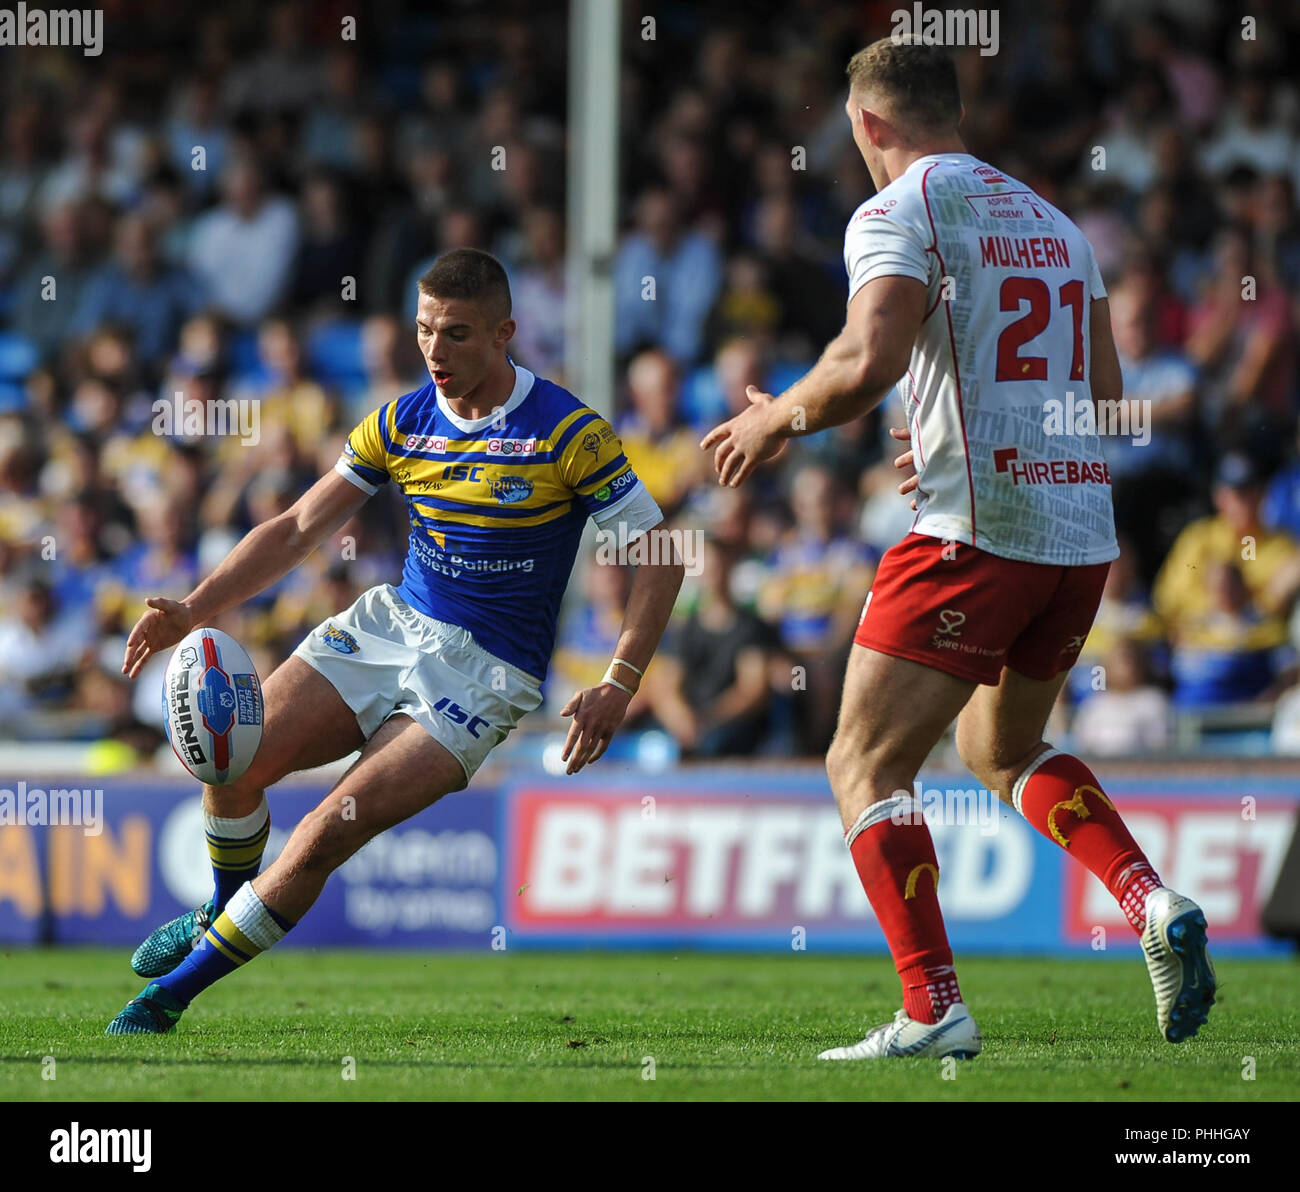 Emerald Headingley Stadium, Leeds, UK. 1st September 2018. Rugby League Super 8's Qualifiers Rugby League between Leeds Rhinos vs Hull Kingston Rovers; Jack Walker of Leeds Rhinos attempts a chip over Robbie Mulhern of Hull Kingston Rovers.  Dean Williams Stock Photo